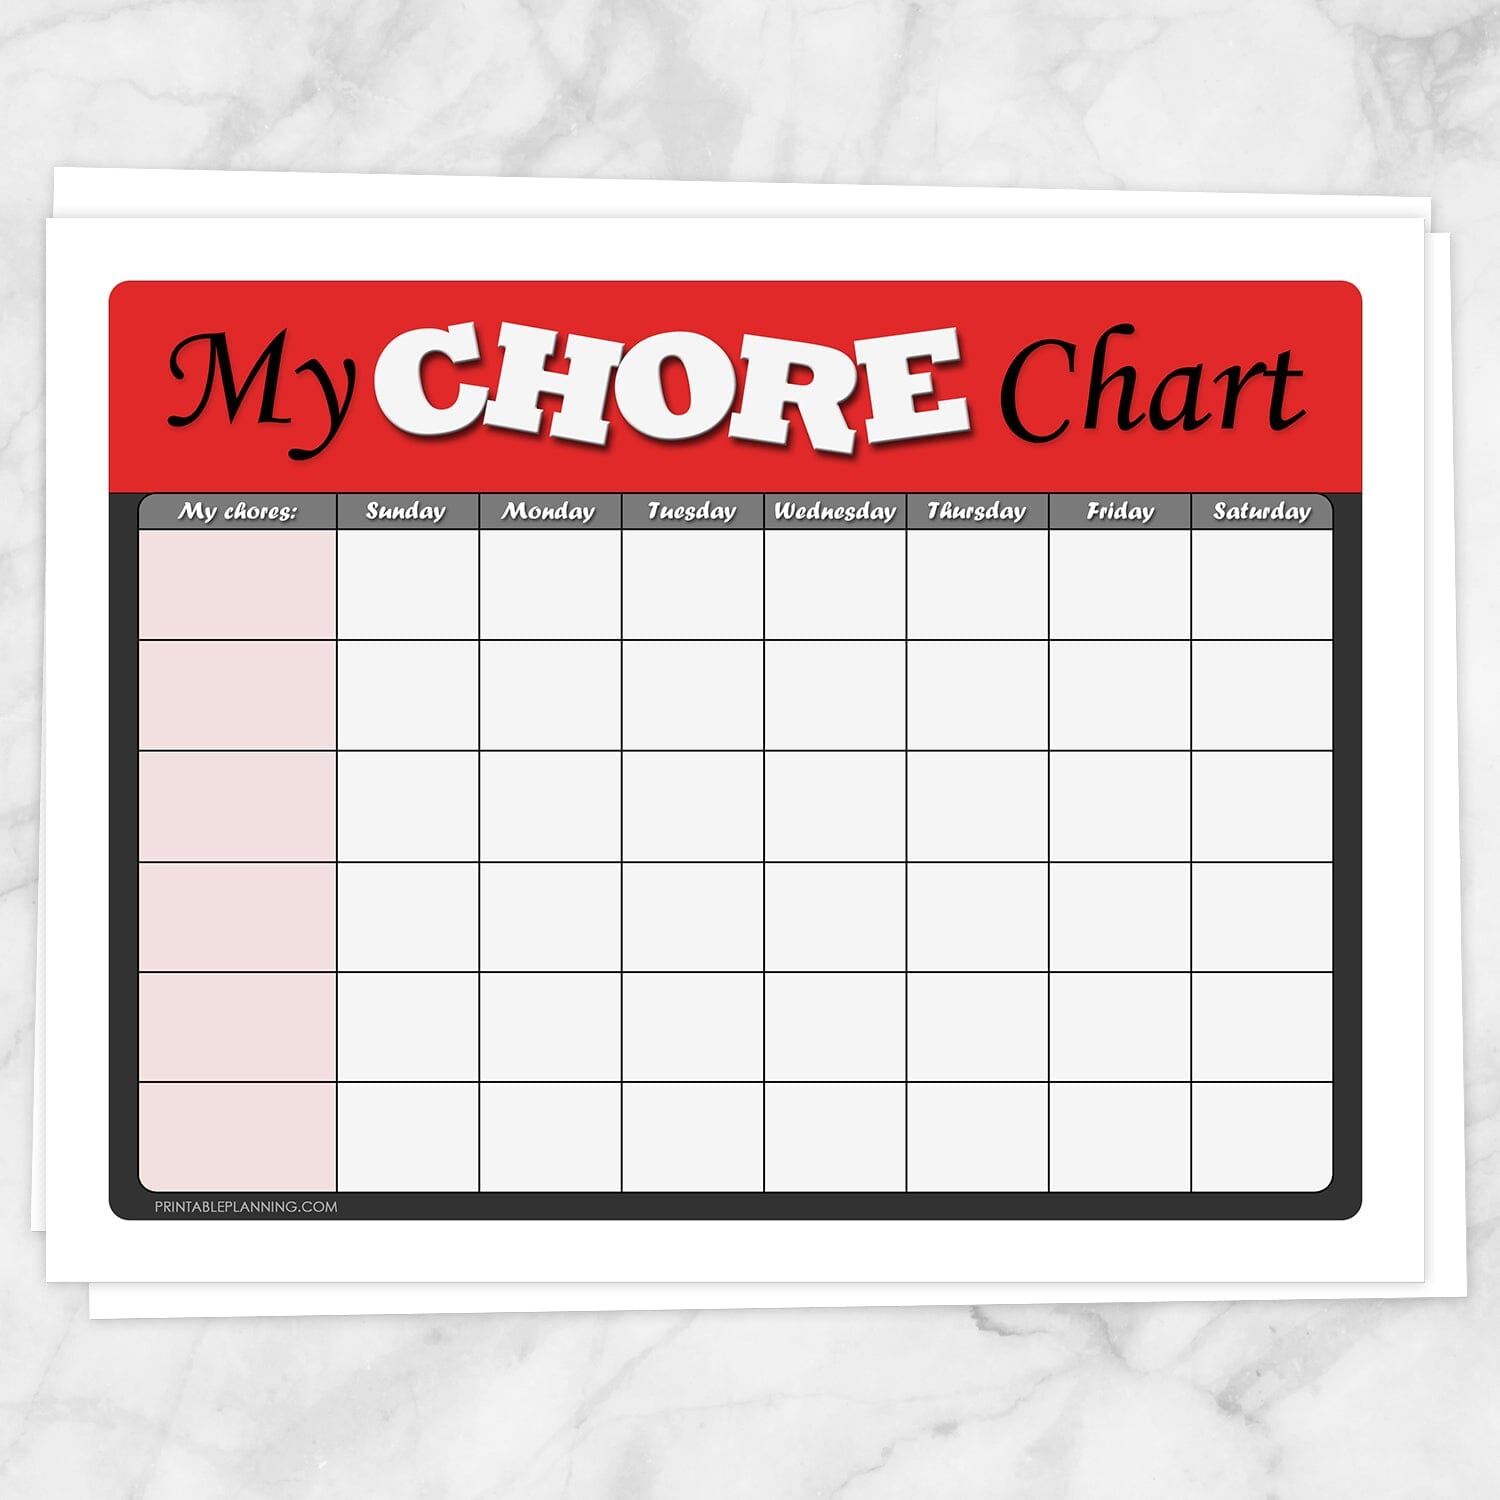 Kids Chore Chart - Red 'My Chore Chart' Weekly Page - Printable